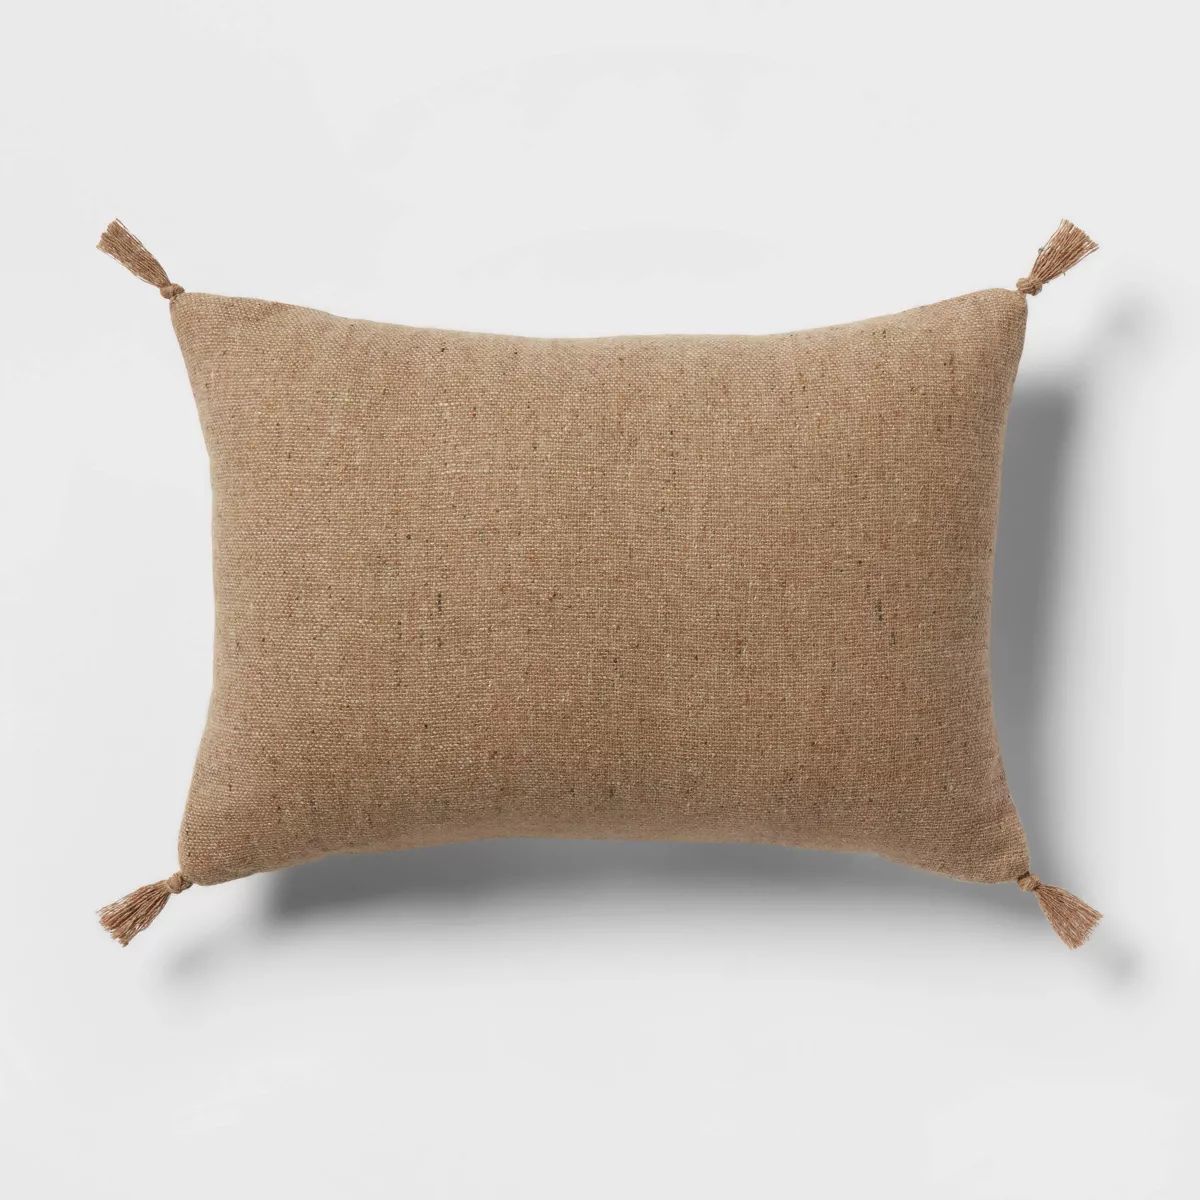 Oblong Traditional Tweed Decorative Throw Pillow Natural Brown - Threshold™ | Target